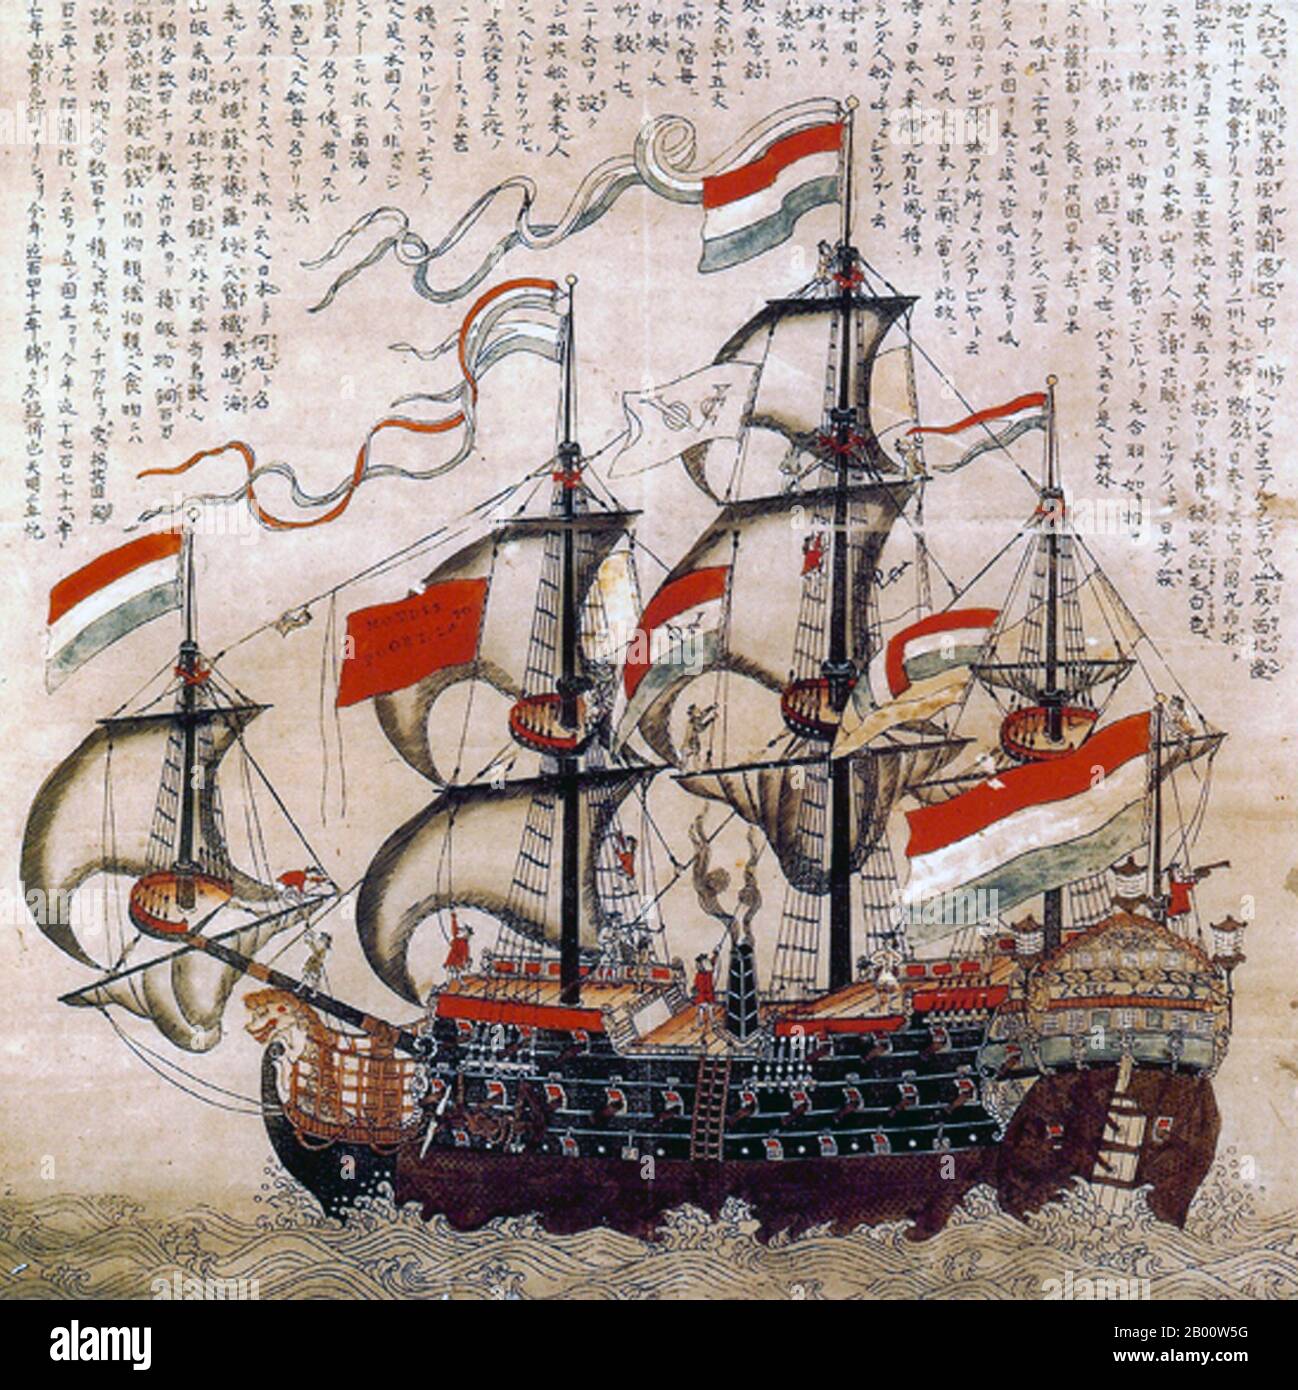 Japan: A Japanese painting of a ship of the Dutch East India Company (VOC), Nagasaki School, 1782.  The Dutch East India Company (Vereenigde Oost-Indische Compagnie or VOC in Dutch, literally 'United East Indian Company') was a chartered company established in 1602, when the States-General of the Netherlands granted it a 21-year monopoly to carry out colonial activities in Asia. It was the first multinational corporation in the world and the first company to issue stock. It was also arguably the world's first megacorporation, possessing quasi-governmental powers, including the ability to wage Stock Photo